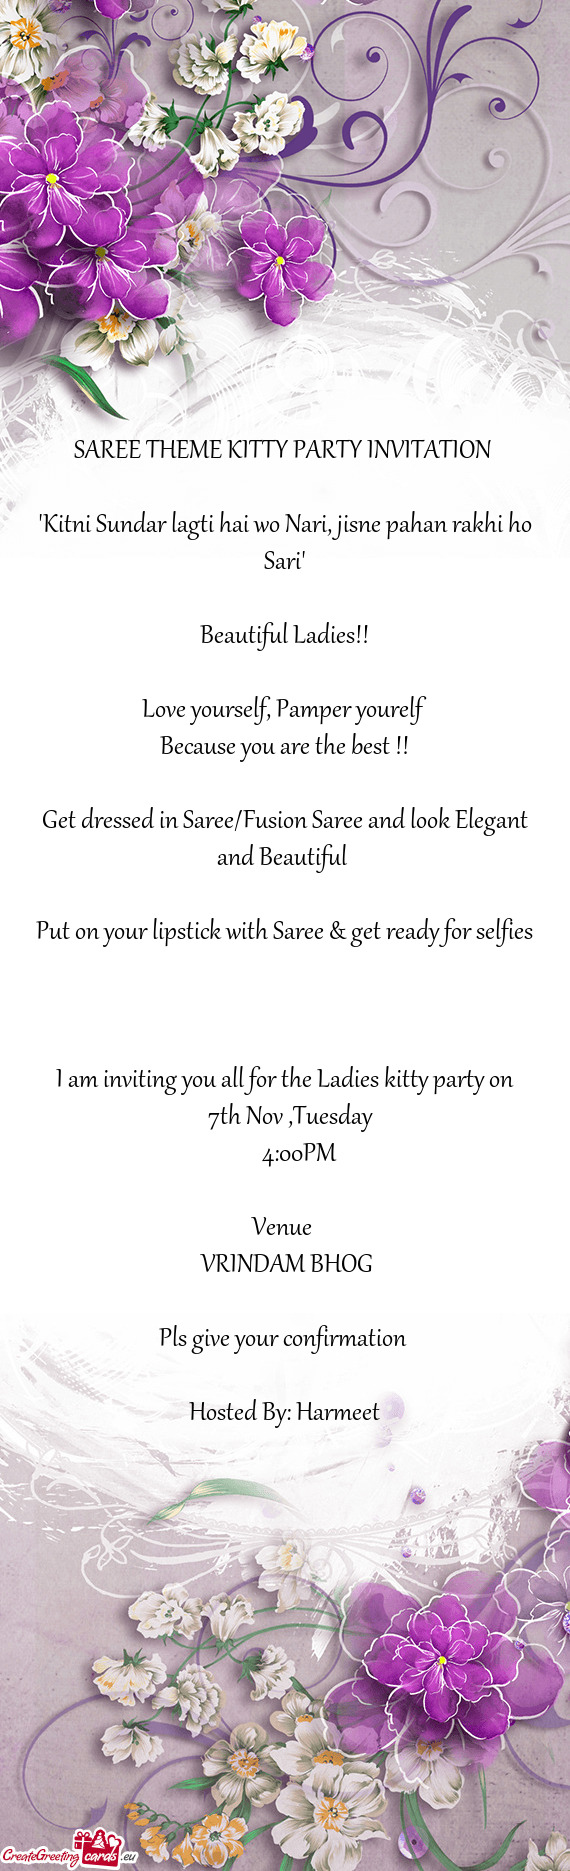 I am inviting you all for the Ladies kitty party on